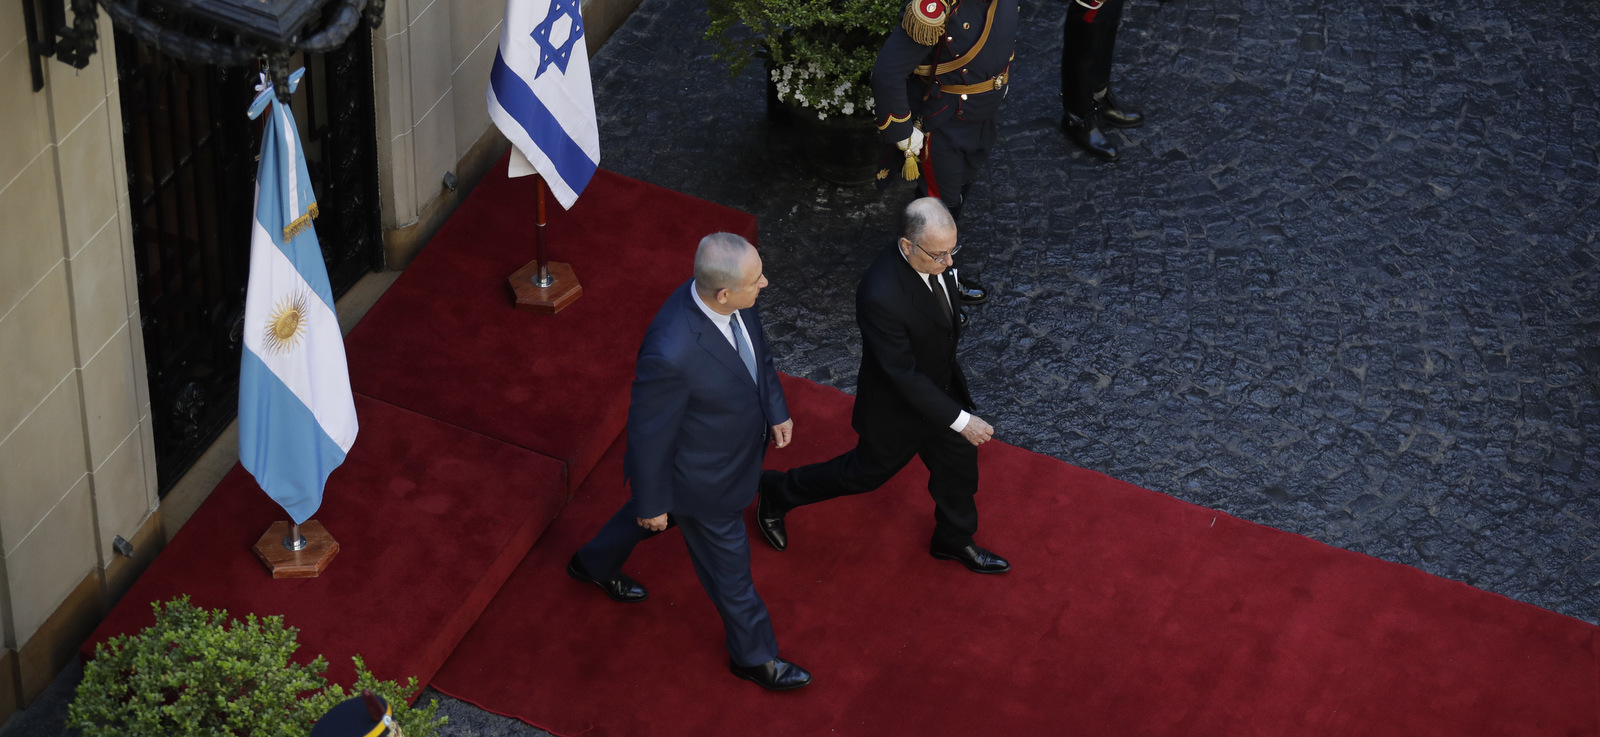 Israeli Prime Minister Benjamin Netanyahu, left, walks with Foreign Minister Jorge Faurie, right, inside the Argentine Foreign Minister Palace San Martin, in Buenos Aires, Argentina, Tuesday, Sept. 12, 2017. Netanyahu is on a two-day official visit to Argentina. (AP Photo/Victor R. Caivano)